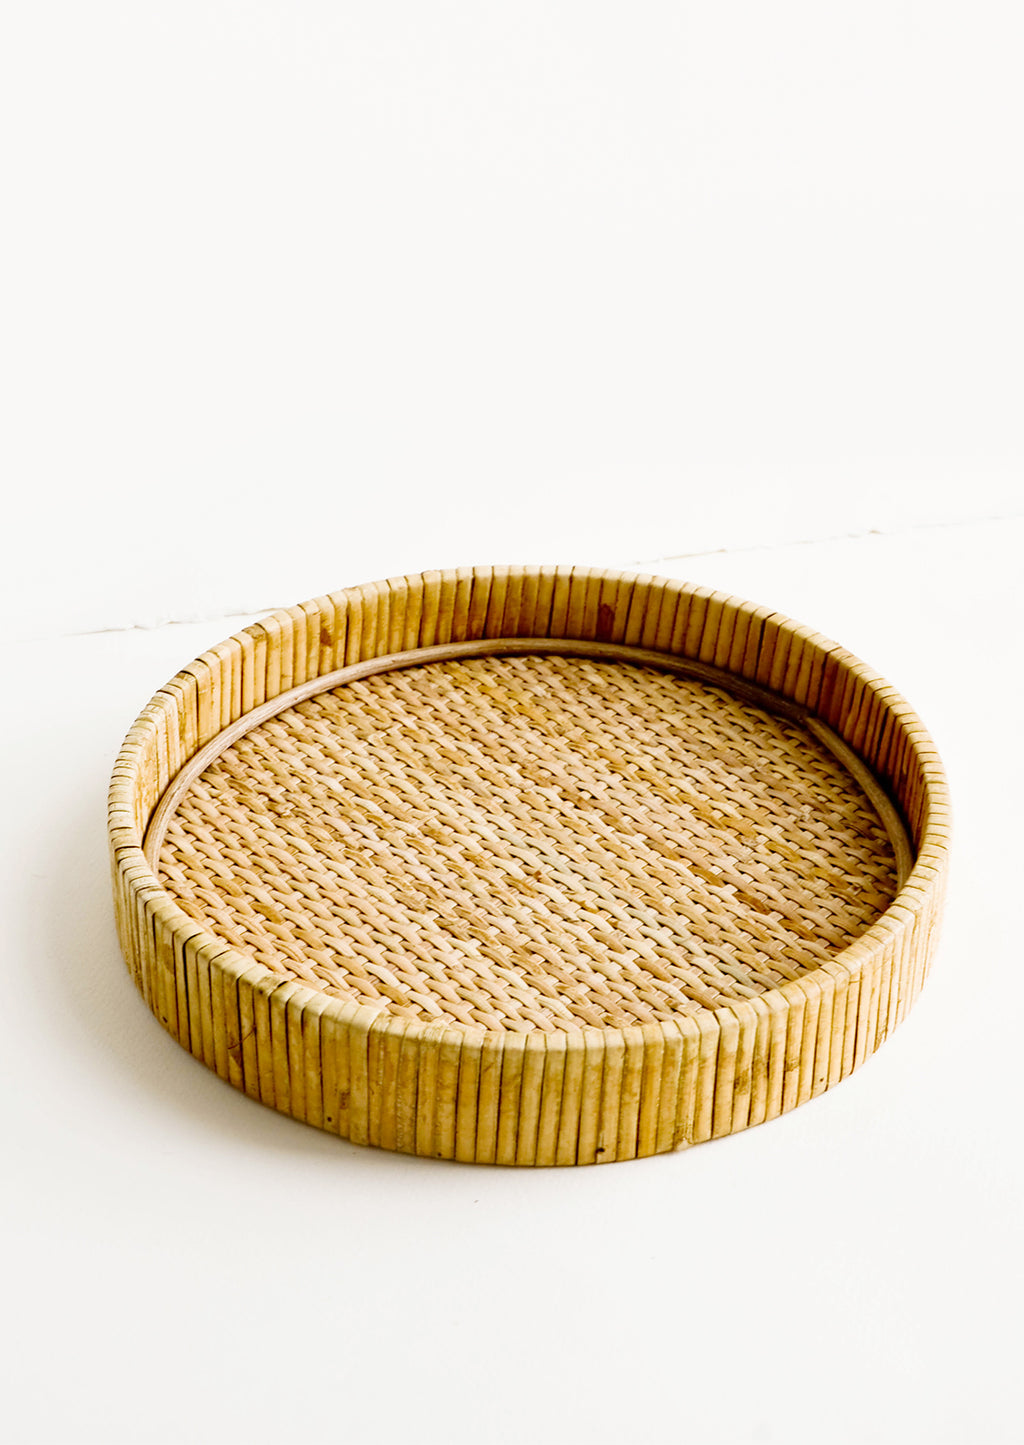 1: Round serving tray with raised rim, made from woven rattan